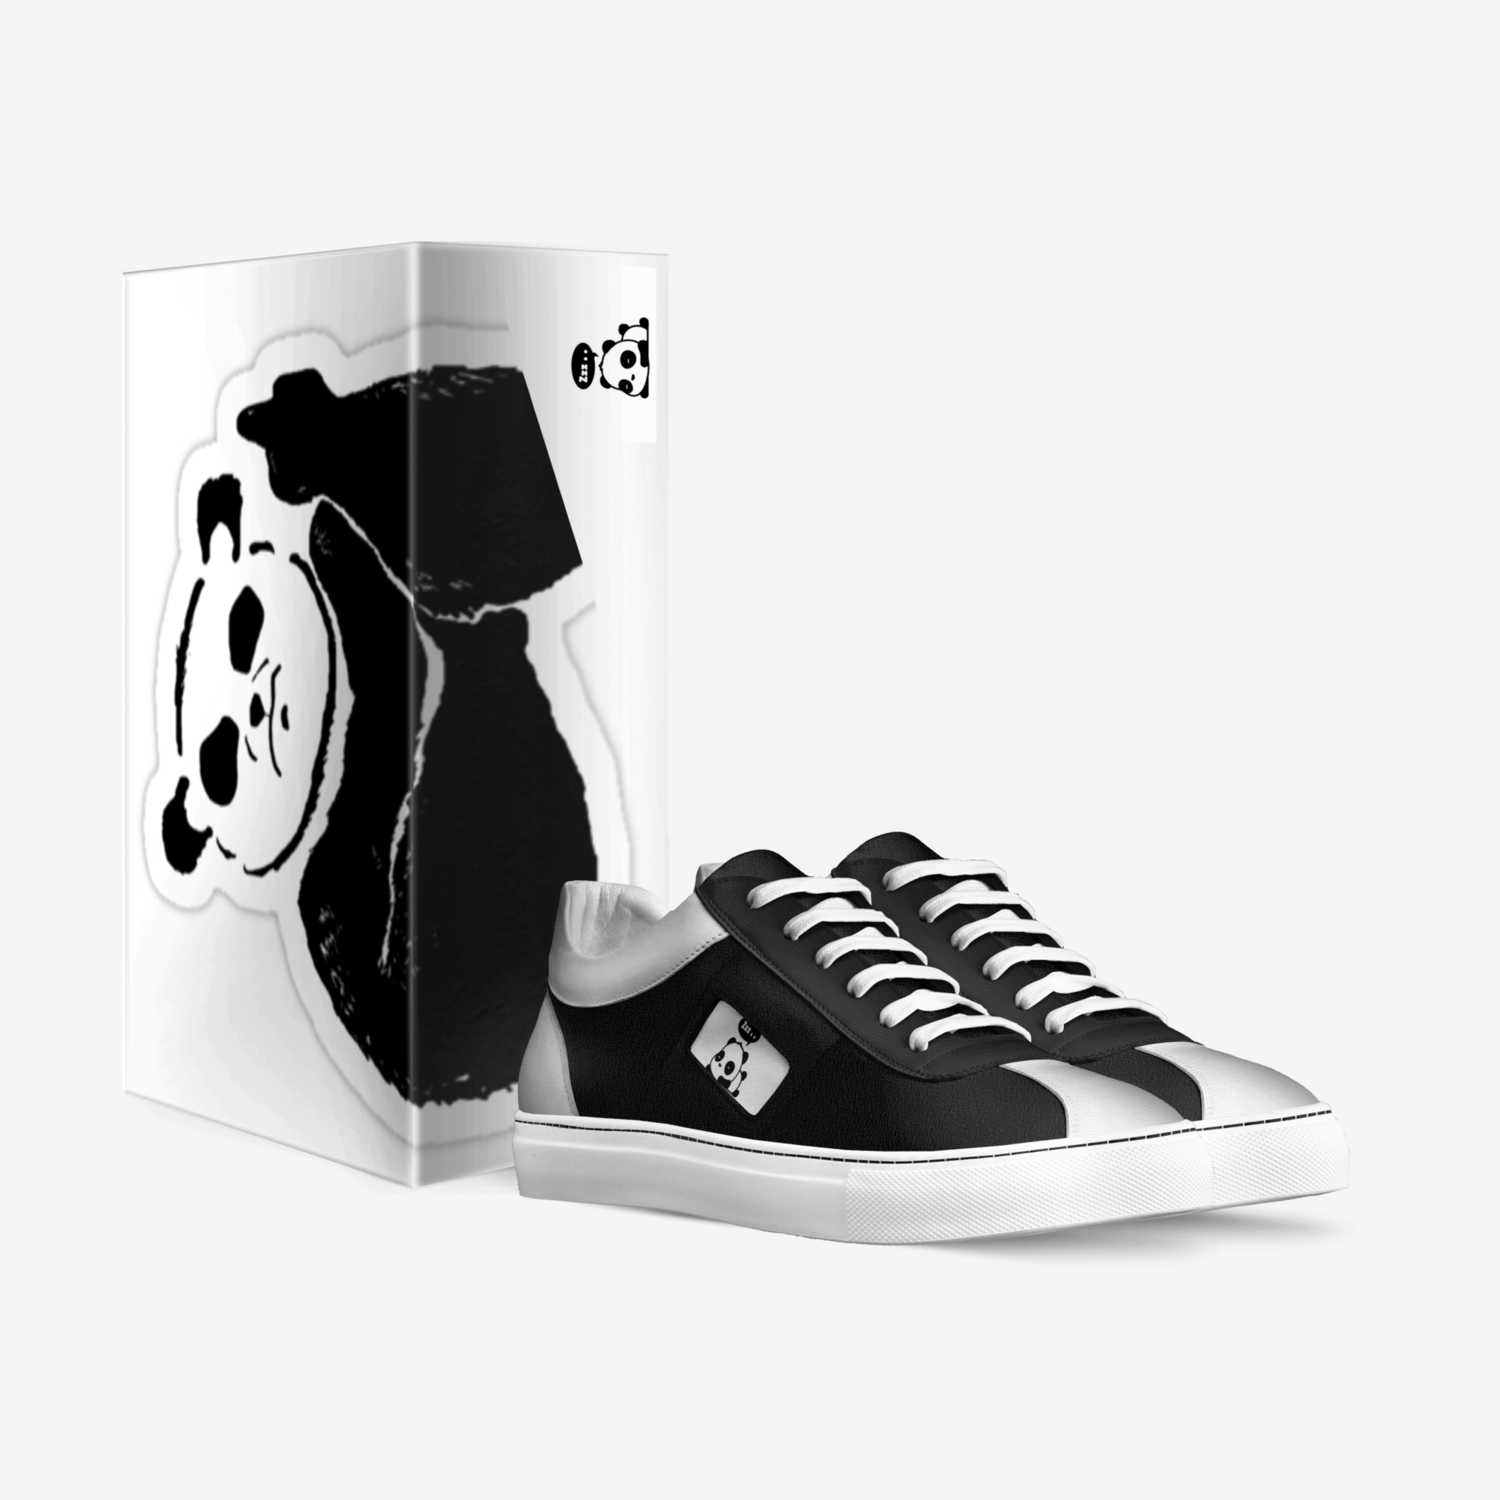 panda custom made in Italy shoes by Bryanlouis Trevon Mosby | Box view